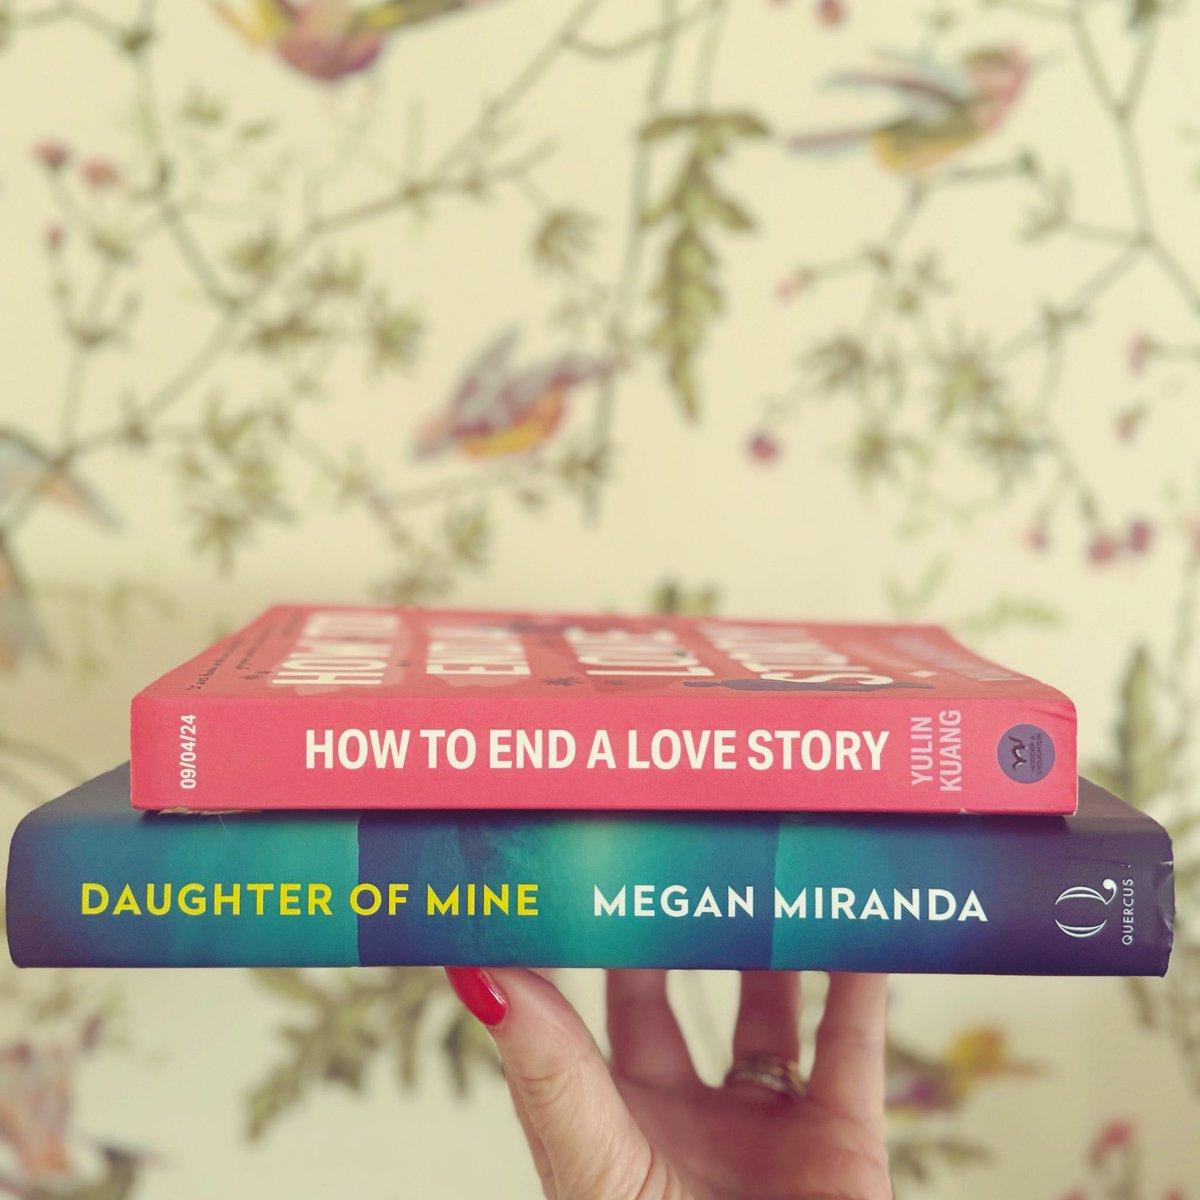 Out today! Happy Publication Day to #HowToEndALoveStory by #YulinKuang and #DaughterOfMine by @MeganLMiranda - looking forward to them both!